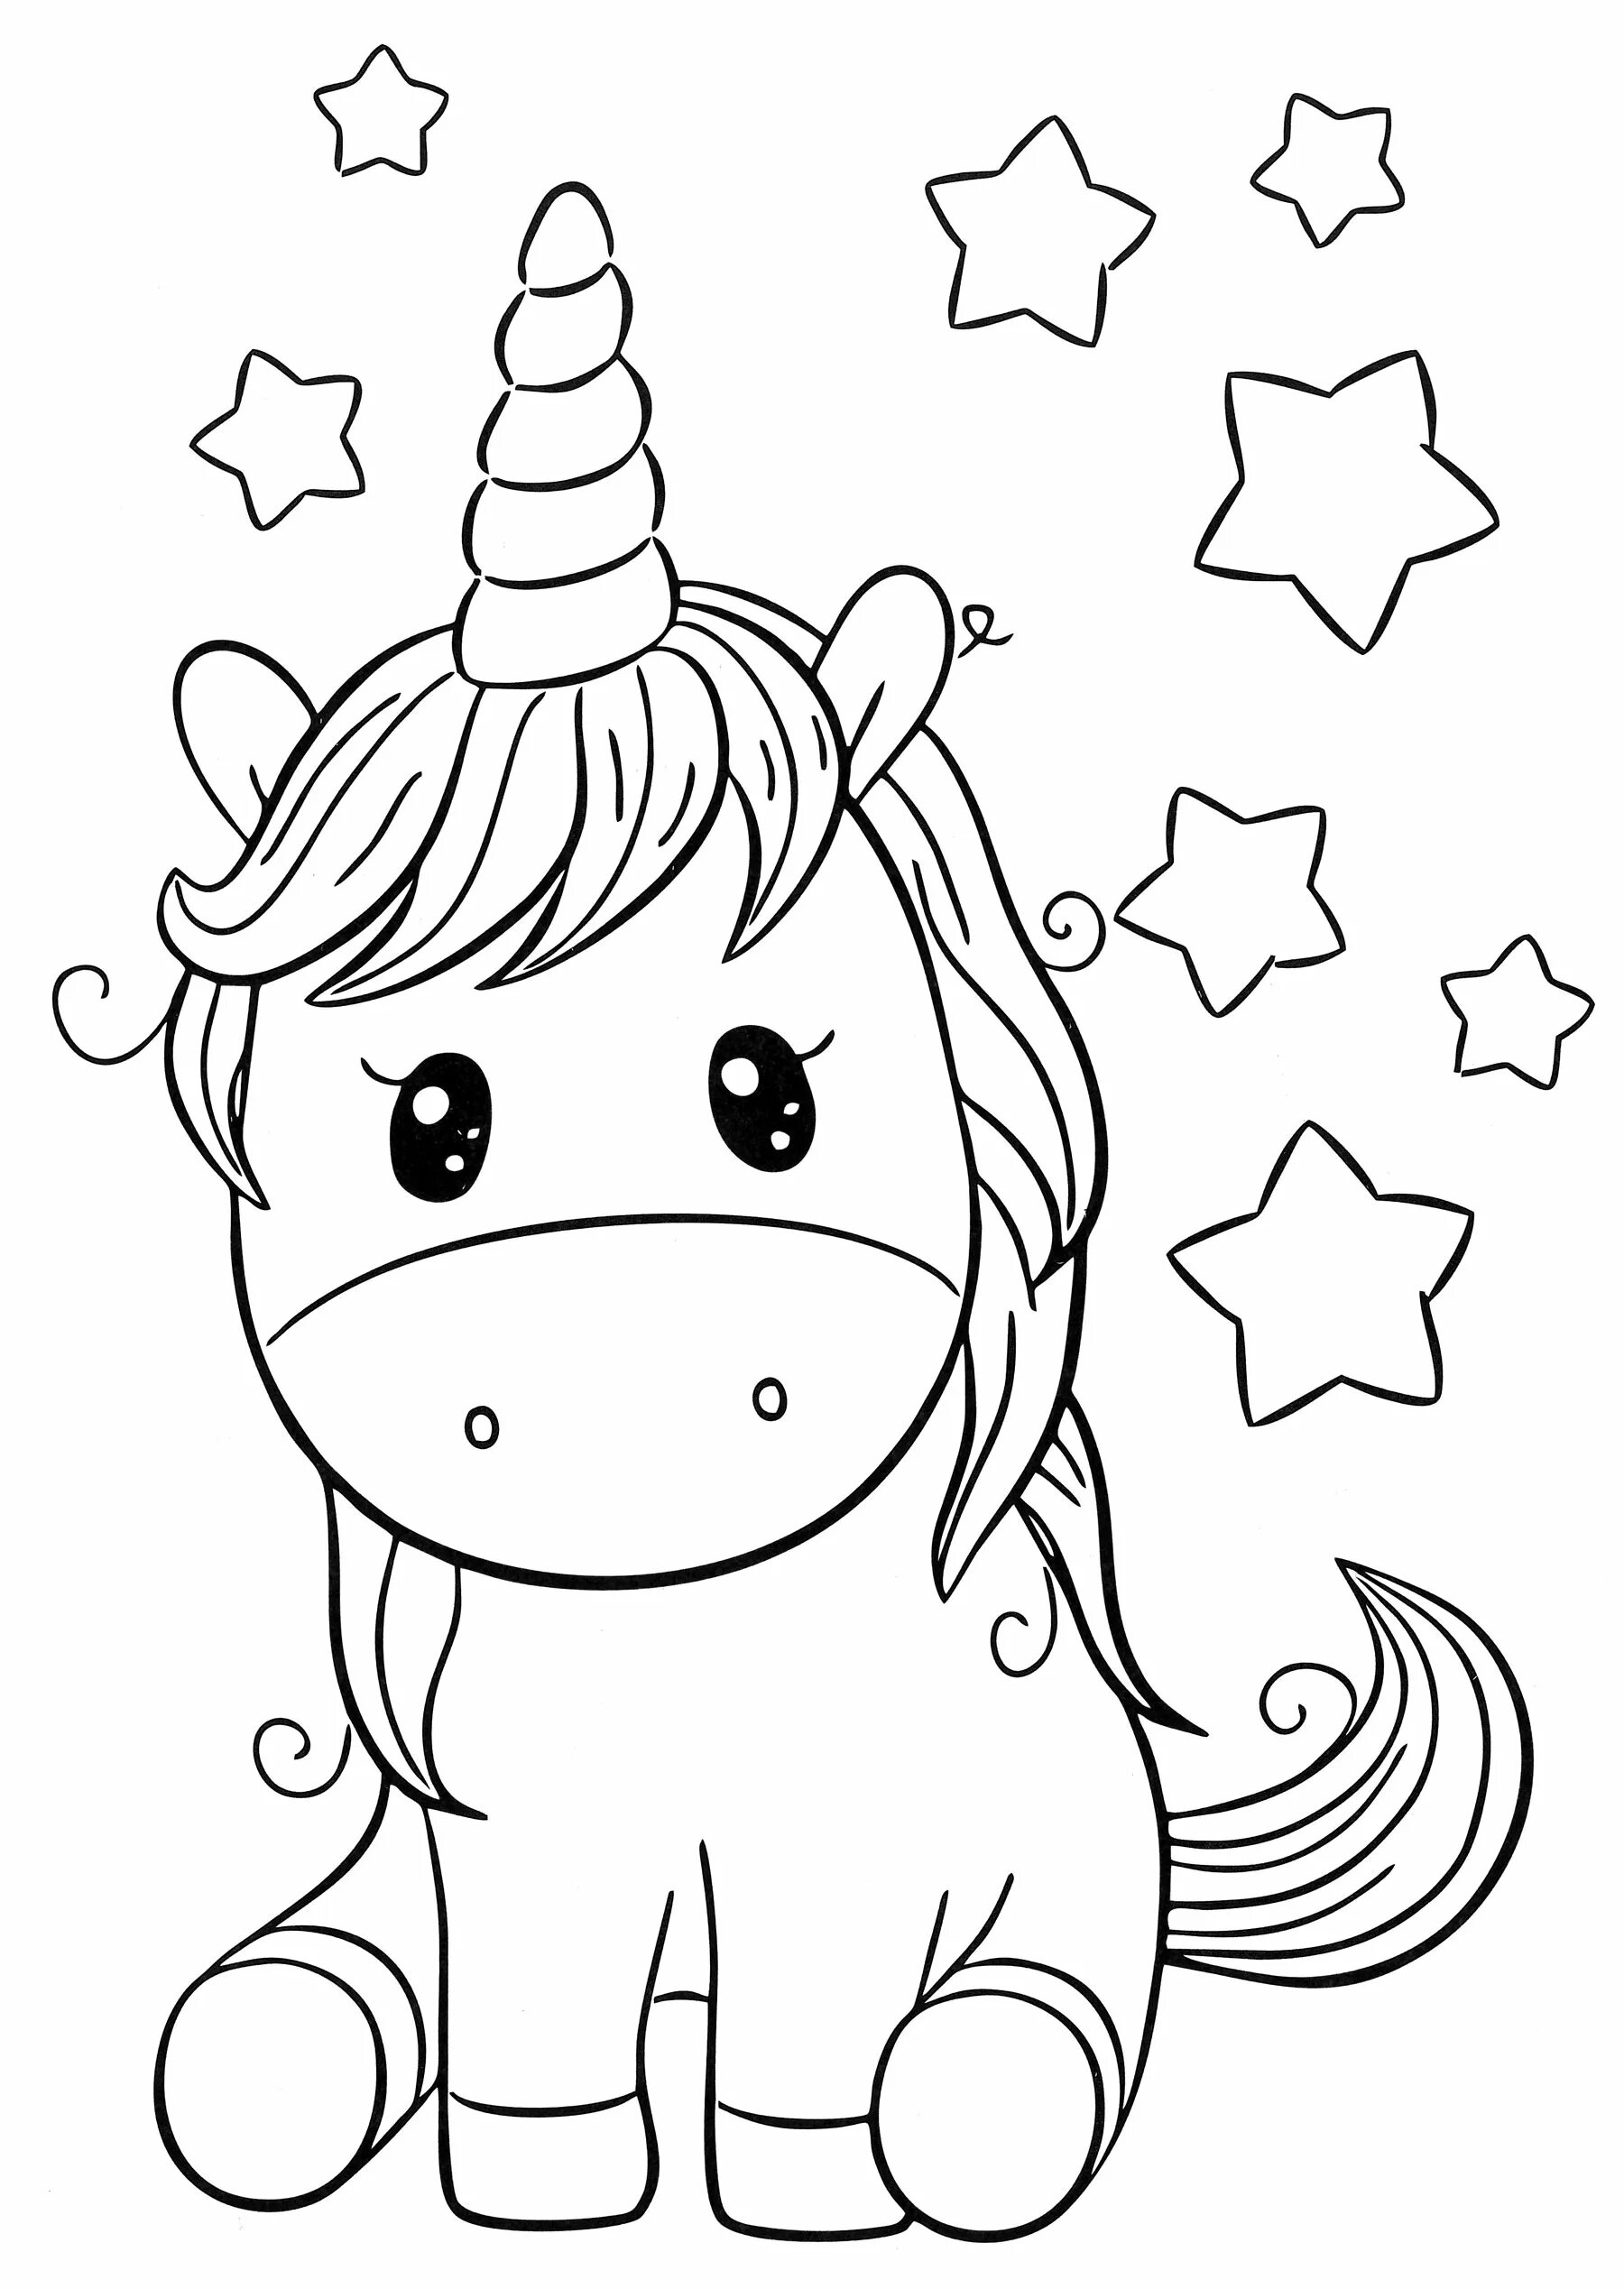 Awesome coloring cute unicorns